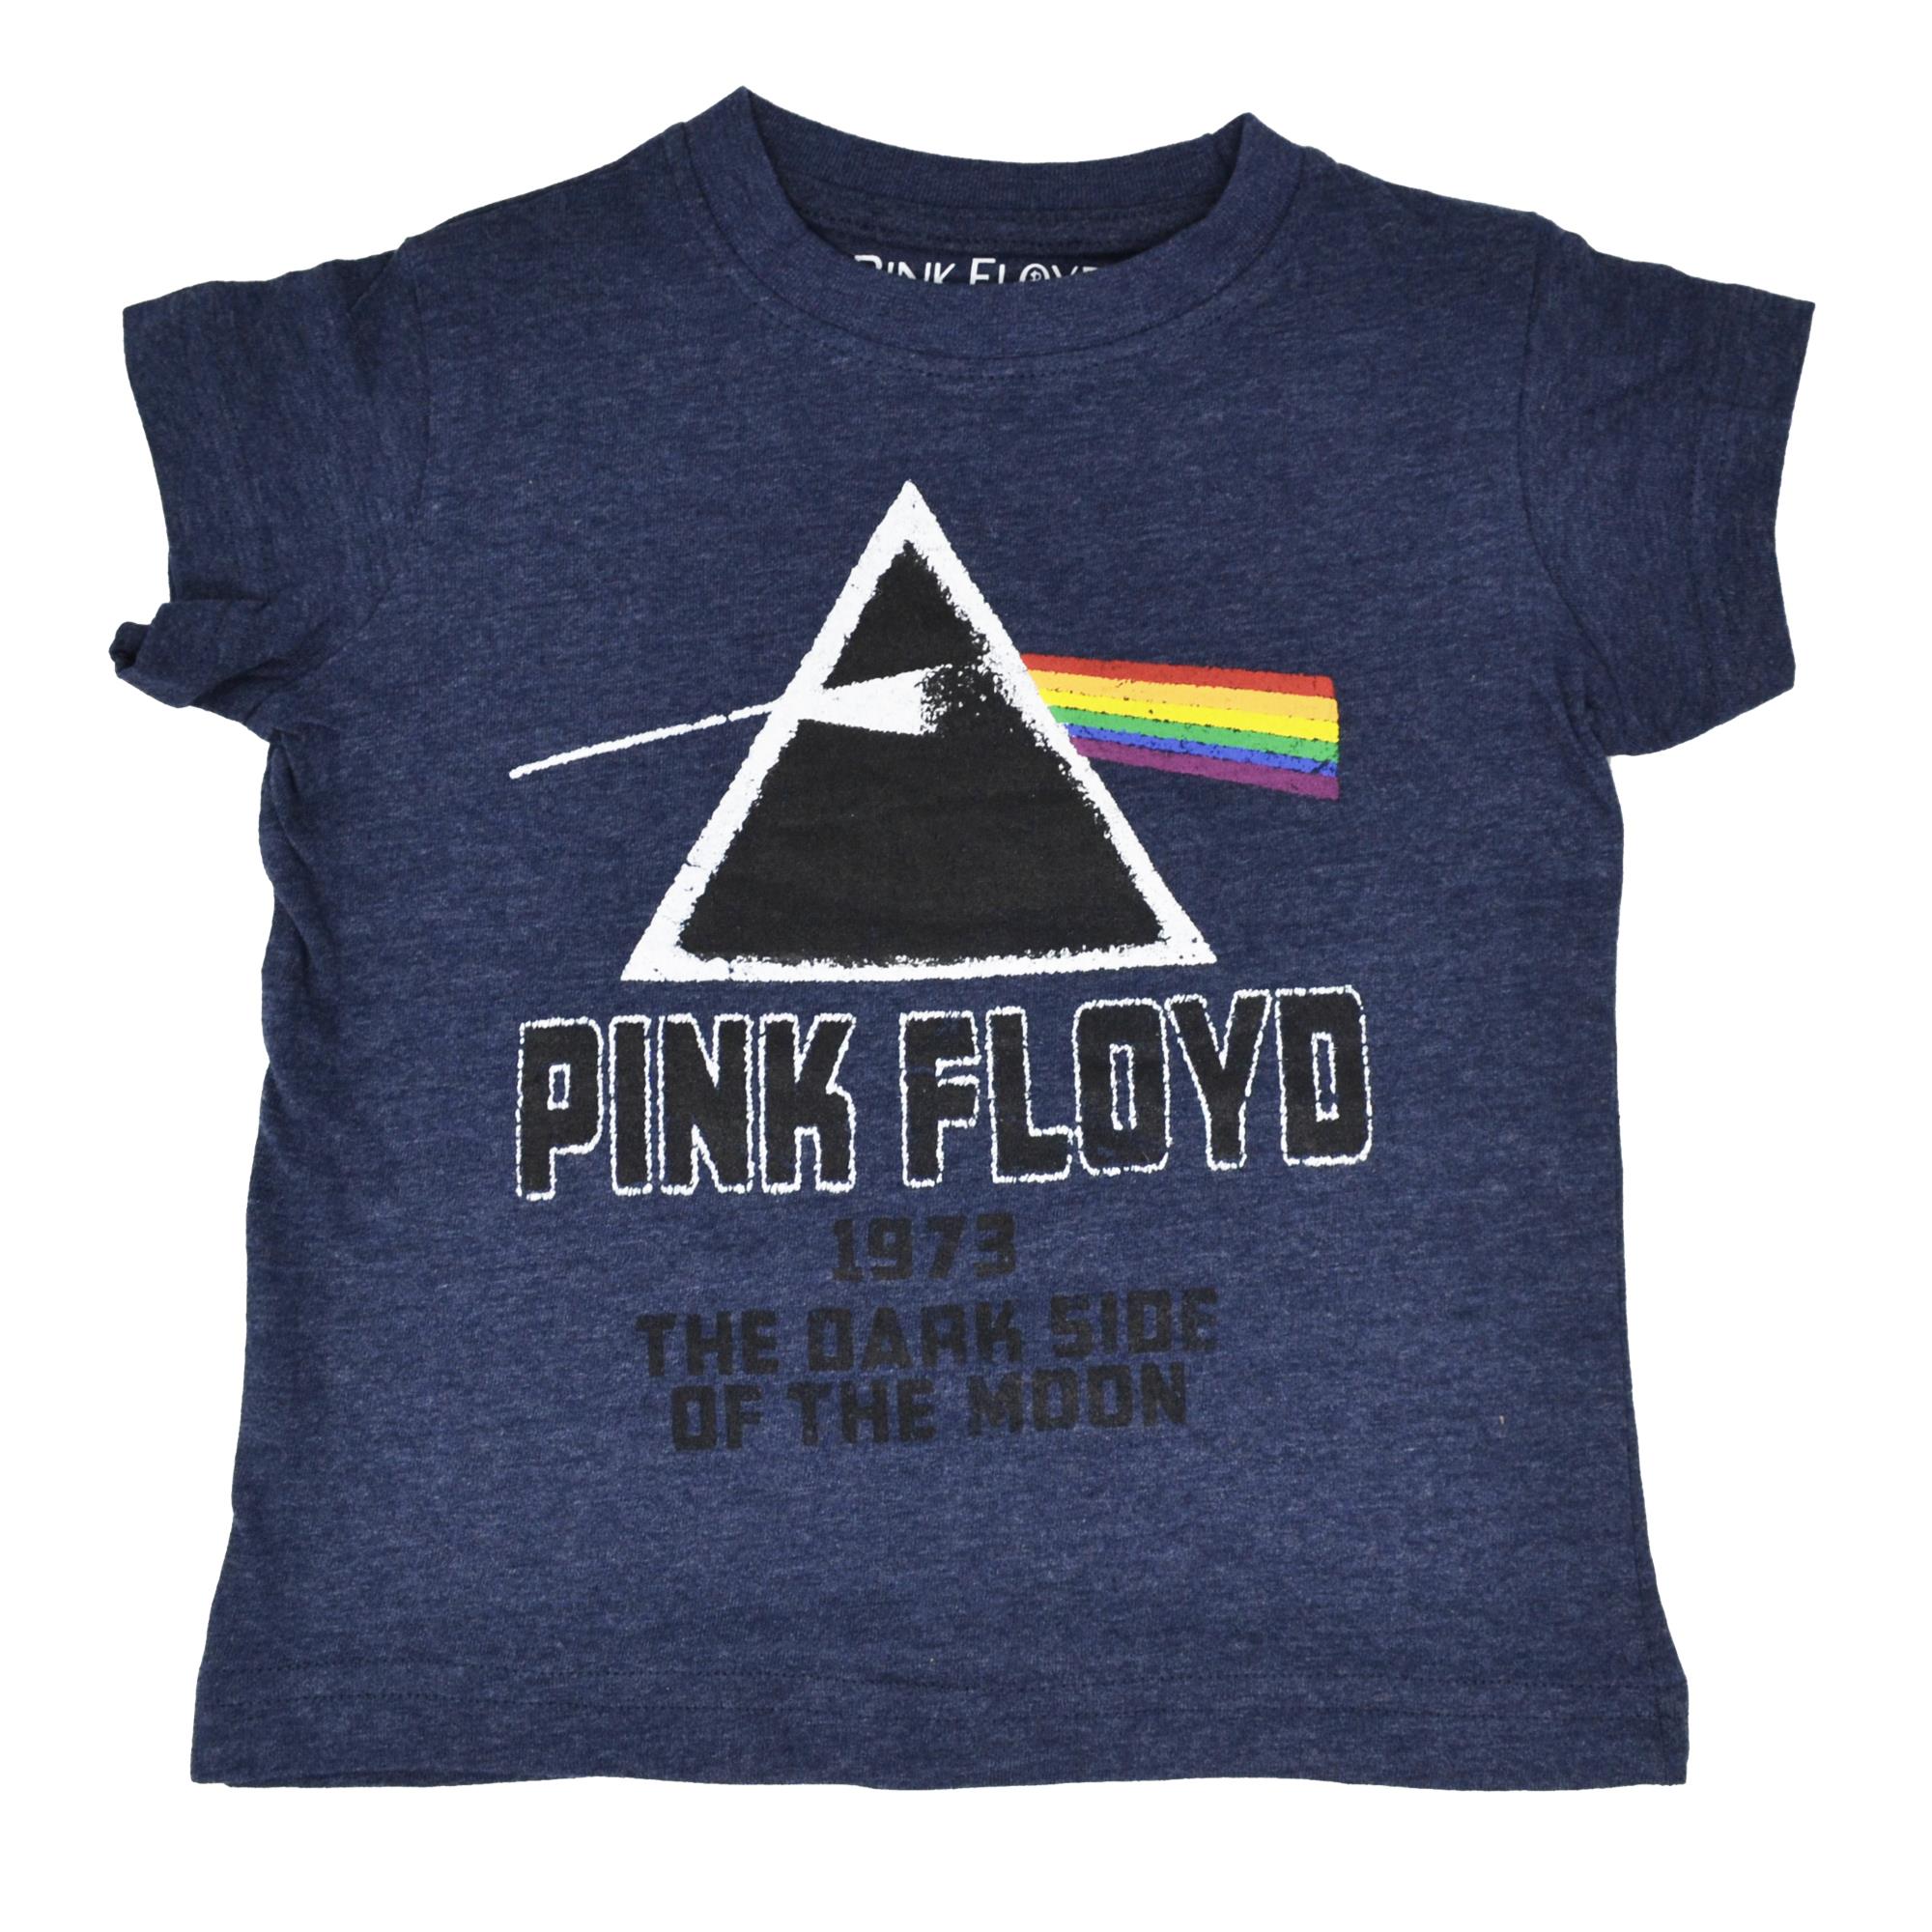 The Dark Side of The Moon 1973 Kid's T-shirt